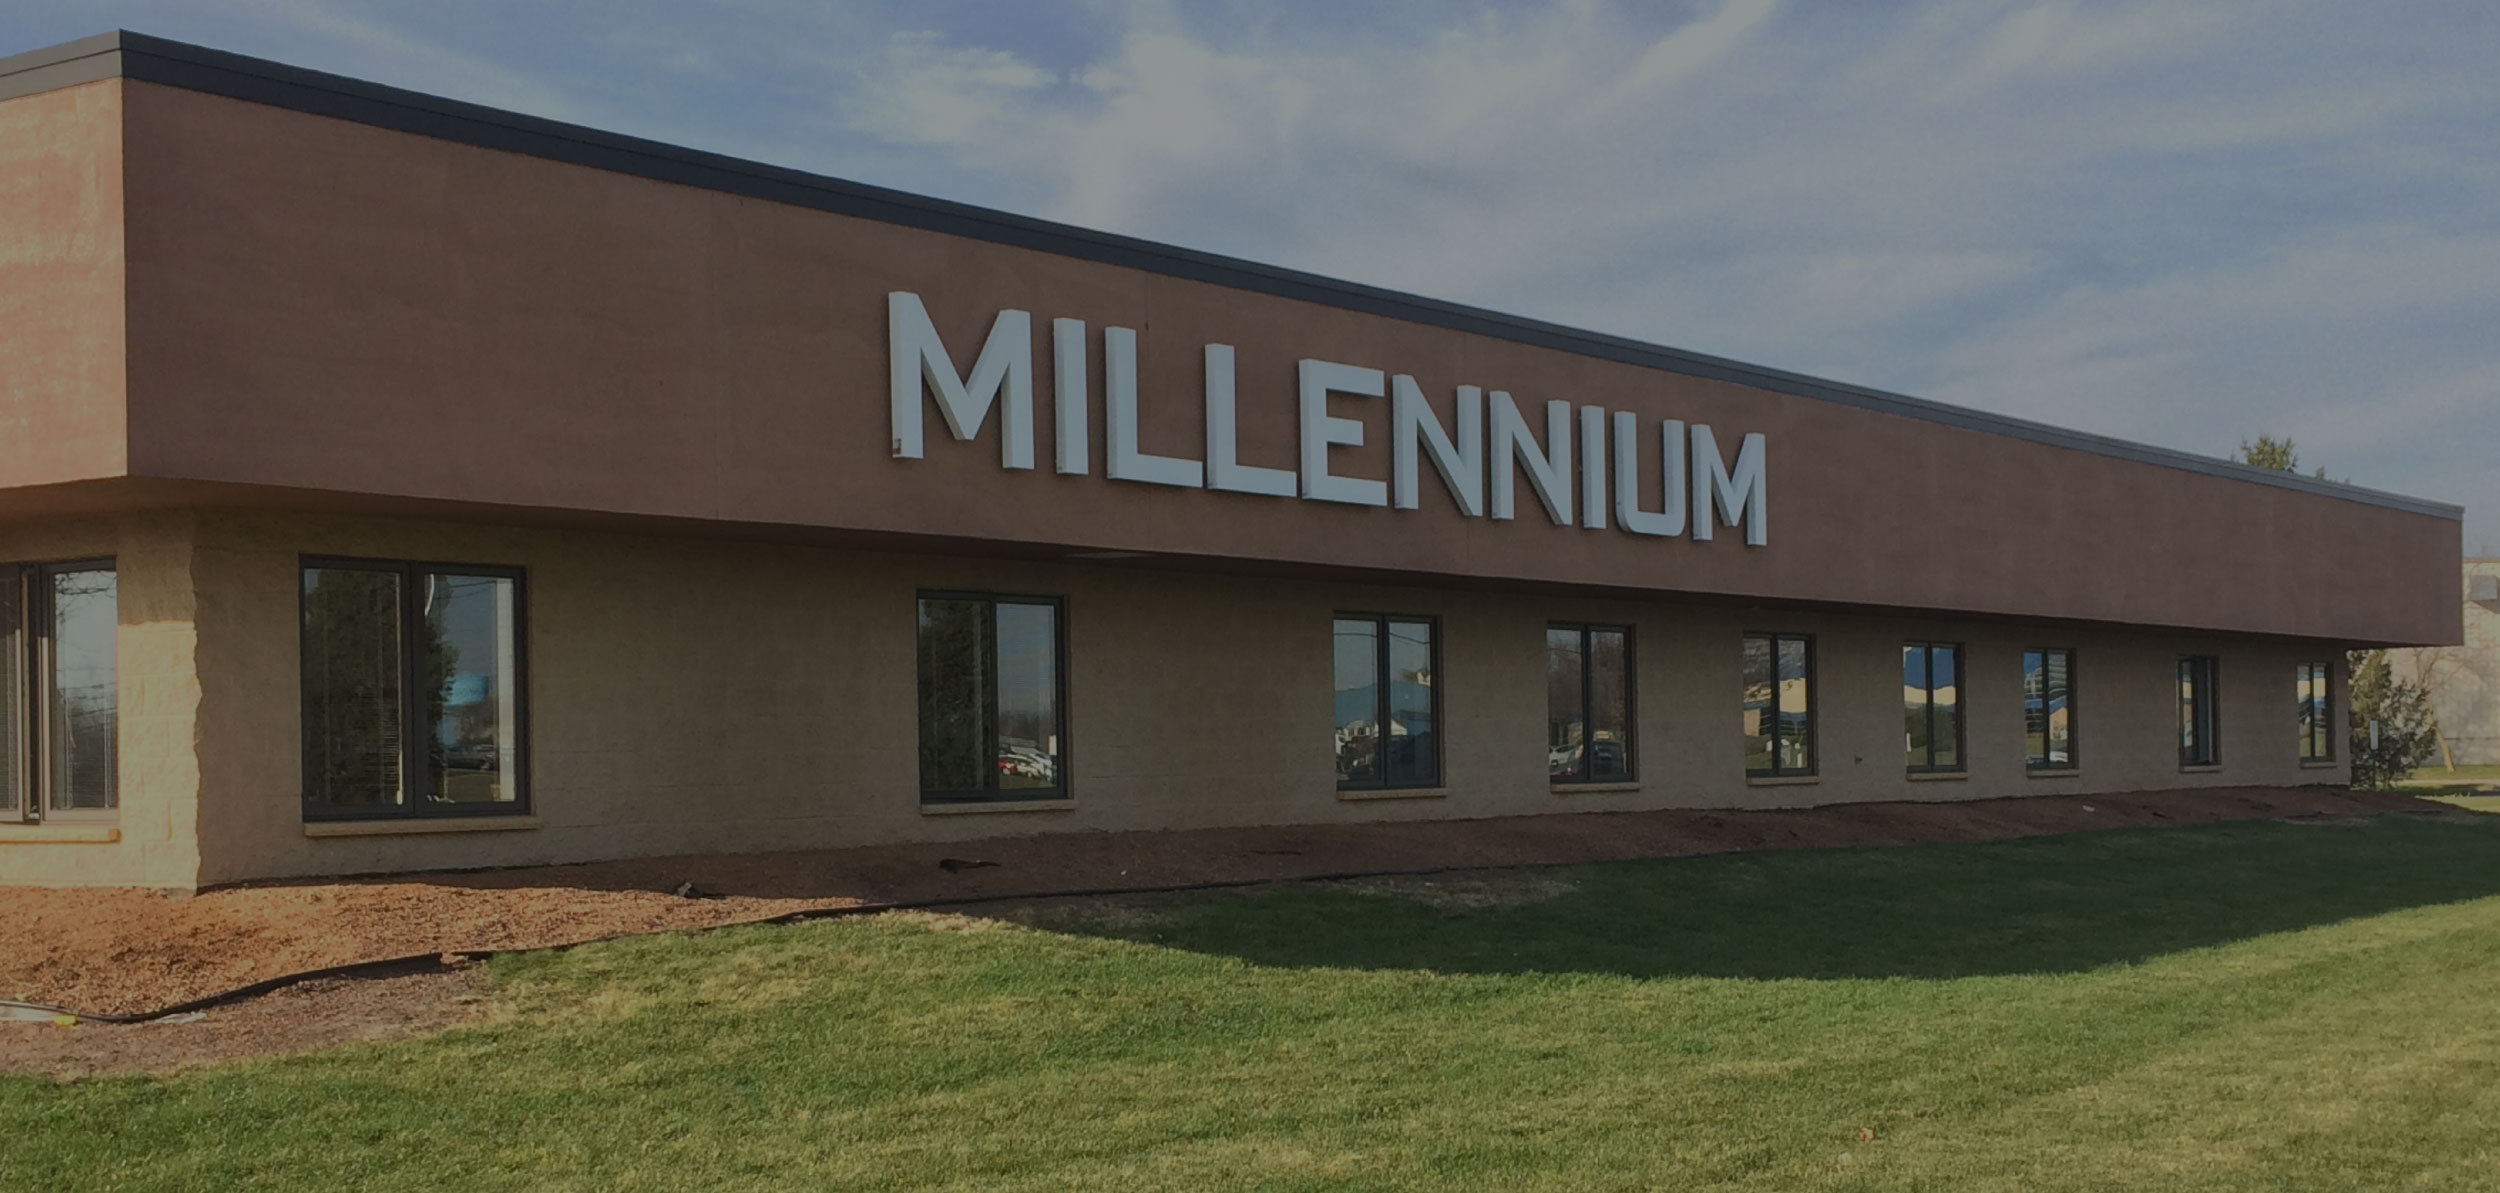 EY Announces James Kyle of Millennium as an Entrepreneur Of The Year® 2022 Midwest Award Finalist.